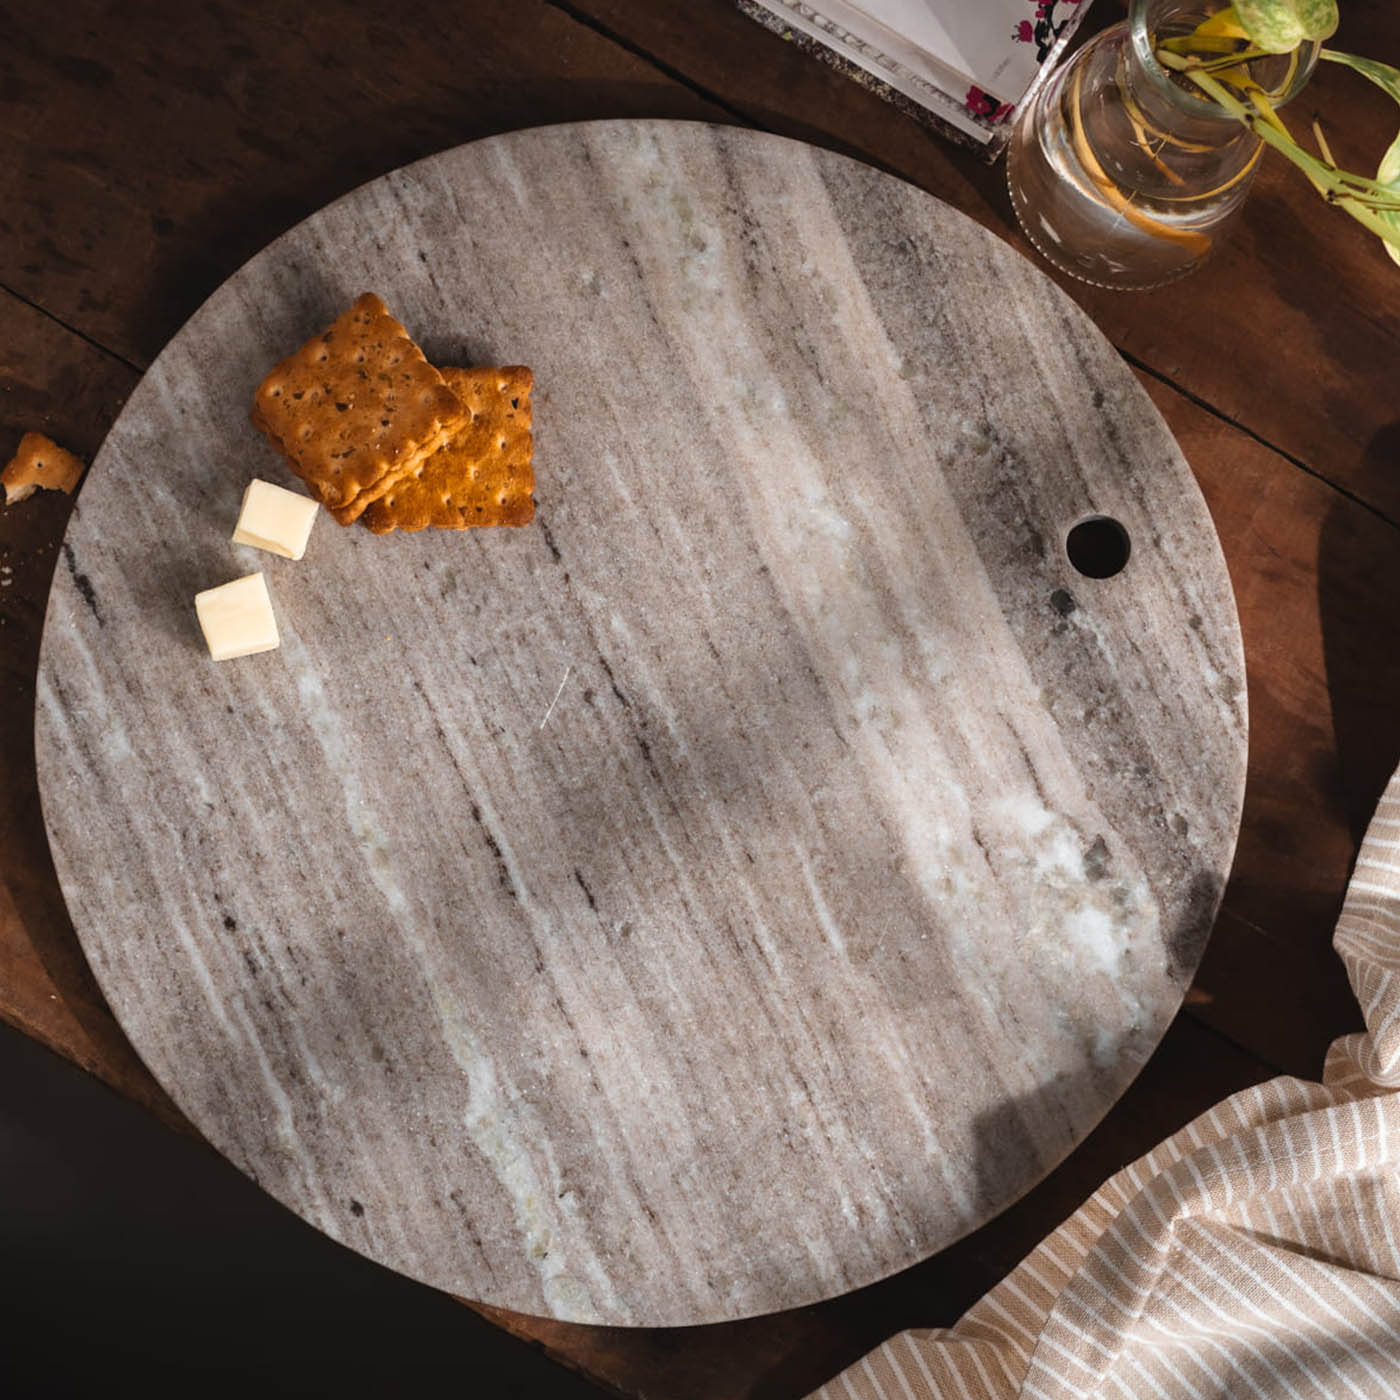 Marbluxe Circular Chopping and Serving Board